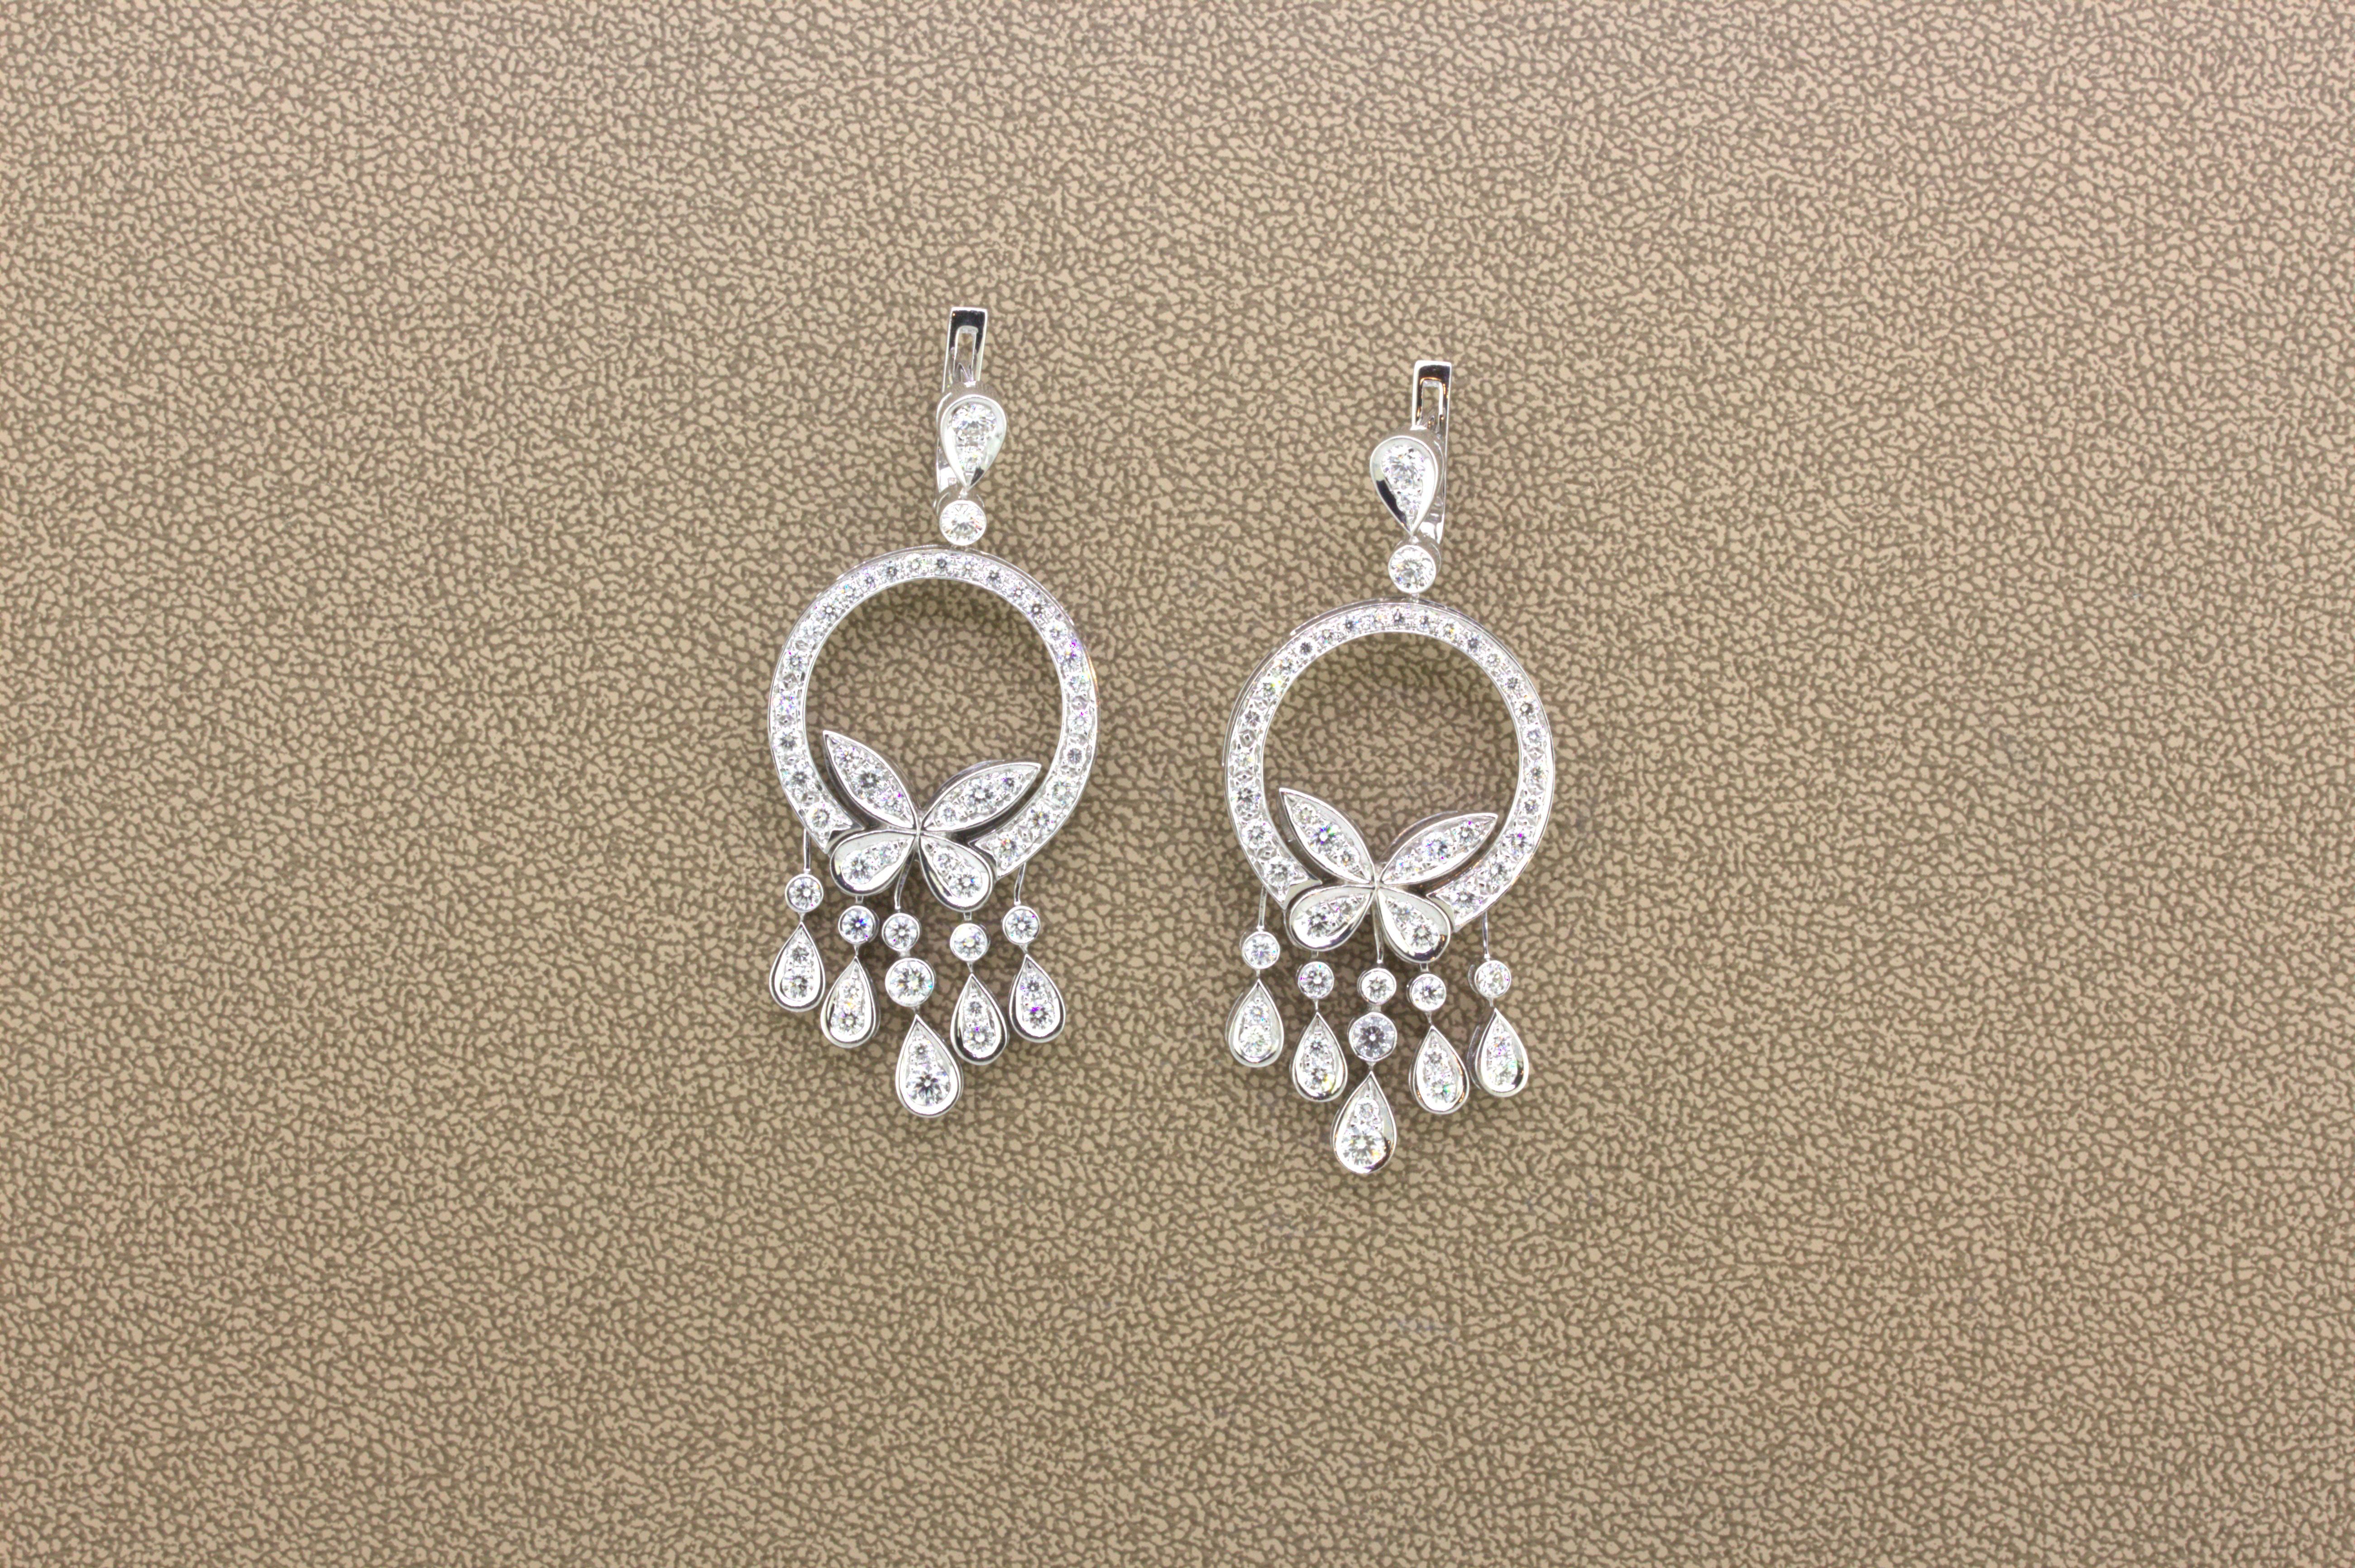 A chic and cute pair of diamond white gold earrings. They feature 4.12 carats of round brilliant-cut diamonds set around the earrings in pear-drops and in the shape of butterflies. They are made in 18k white gold with a very strong and sturdy